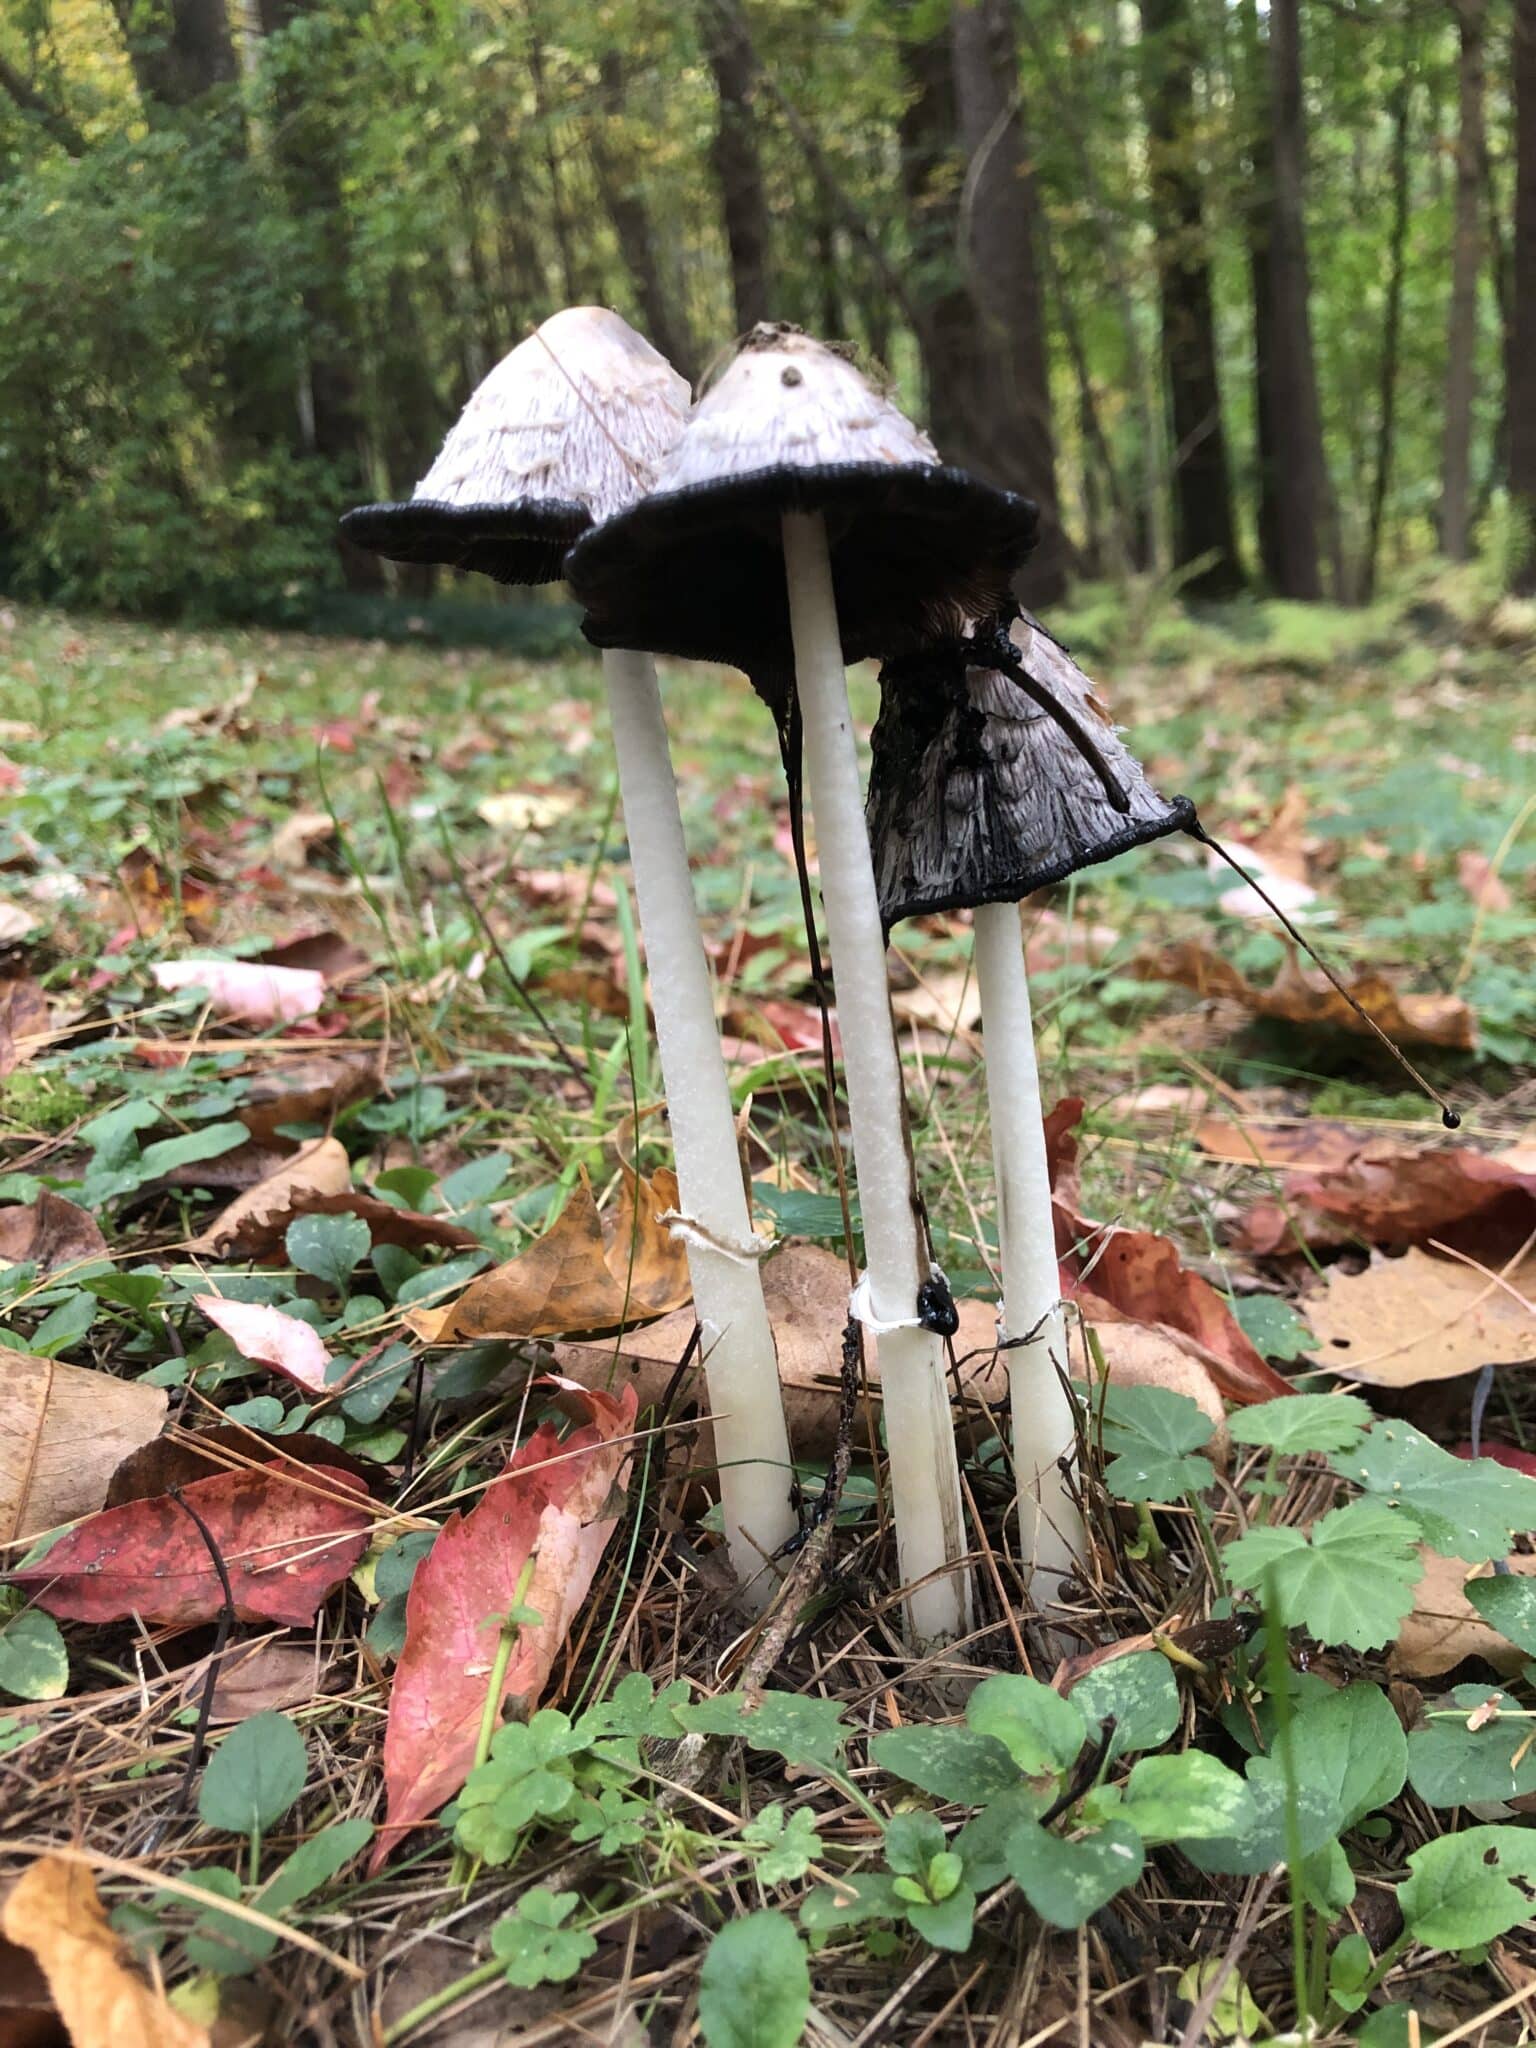 After a long rain the mushrooms come up out of the green turf. These 3 are gray and black and 6" tall.